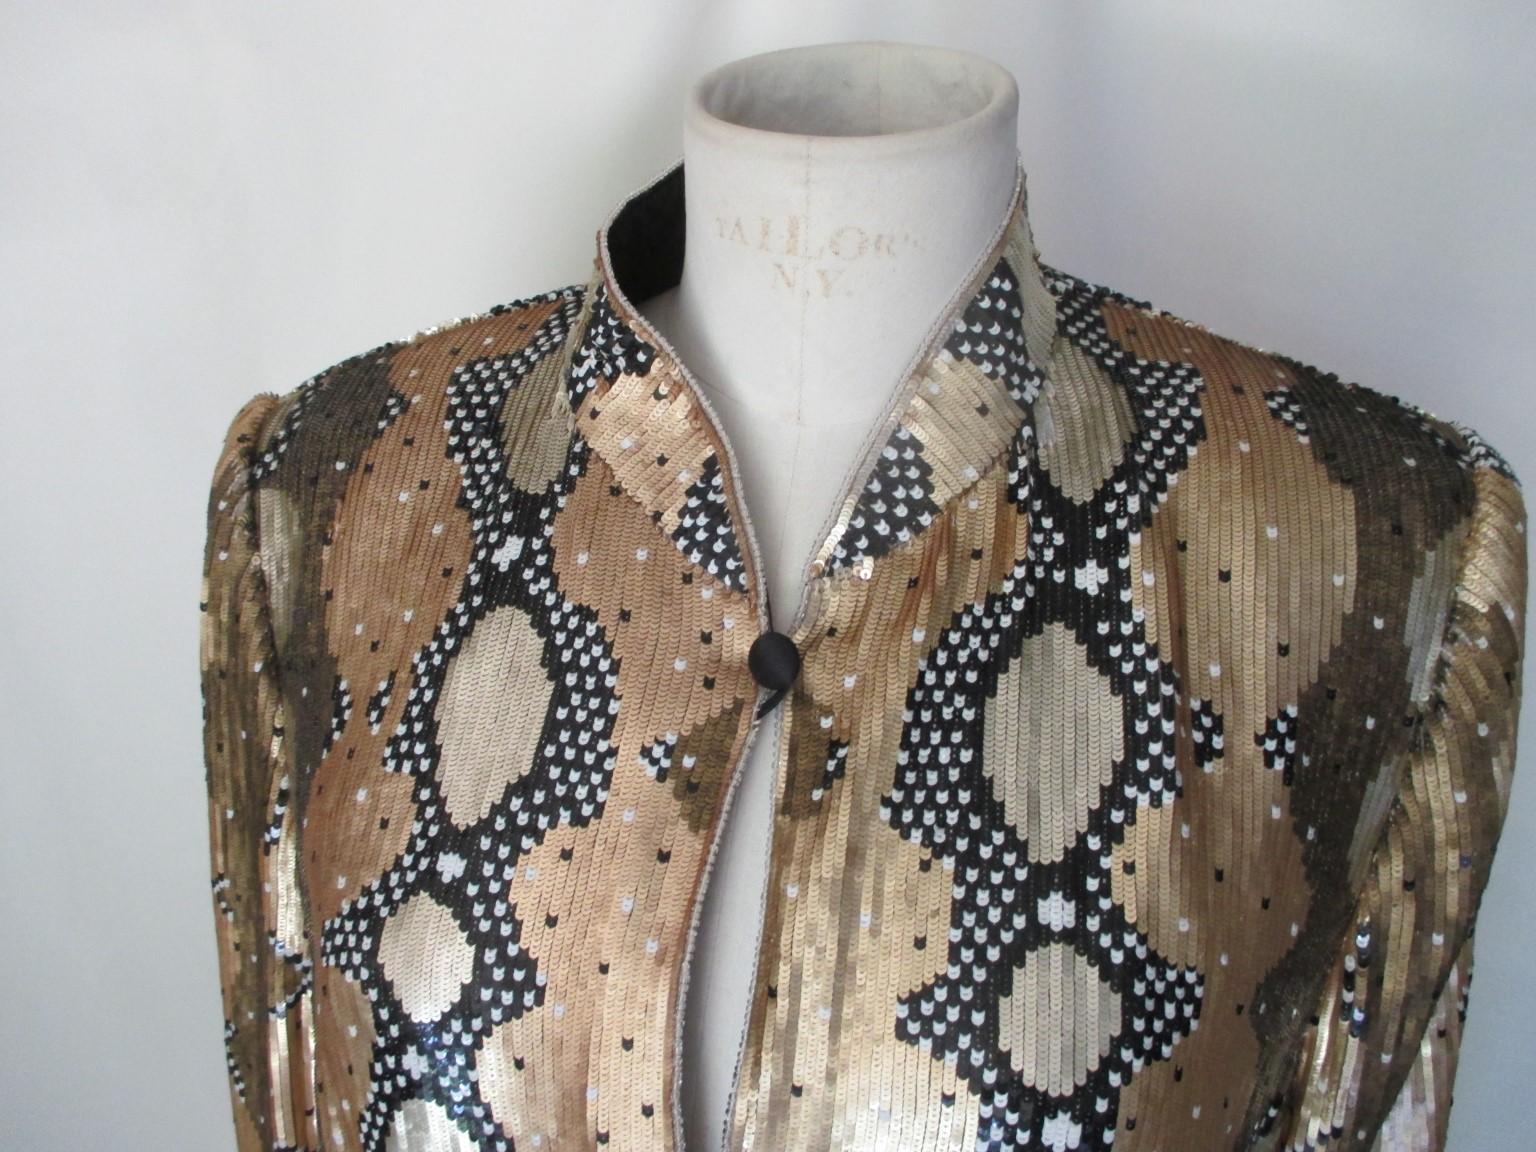 Rare Escada Couture gold/silver /black/bronze fully sequins ladies evening/party jacket.

We offer more exclusive items, view our frontstore.

Details:
At front 7 black buttons 
Fully lined
Vintage 1980's
Can be worn on jeans or at events
Pre loved